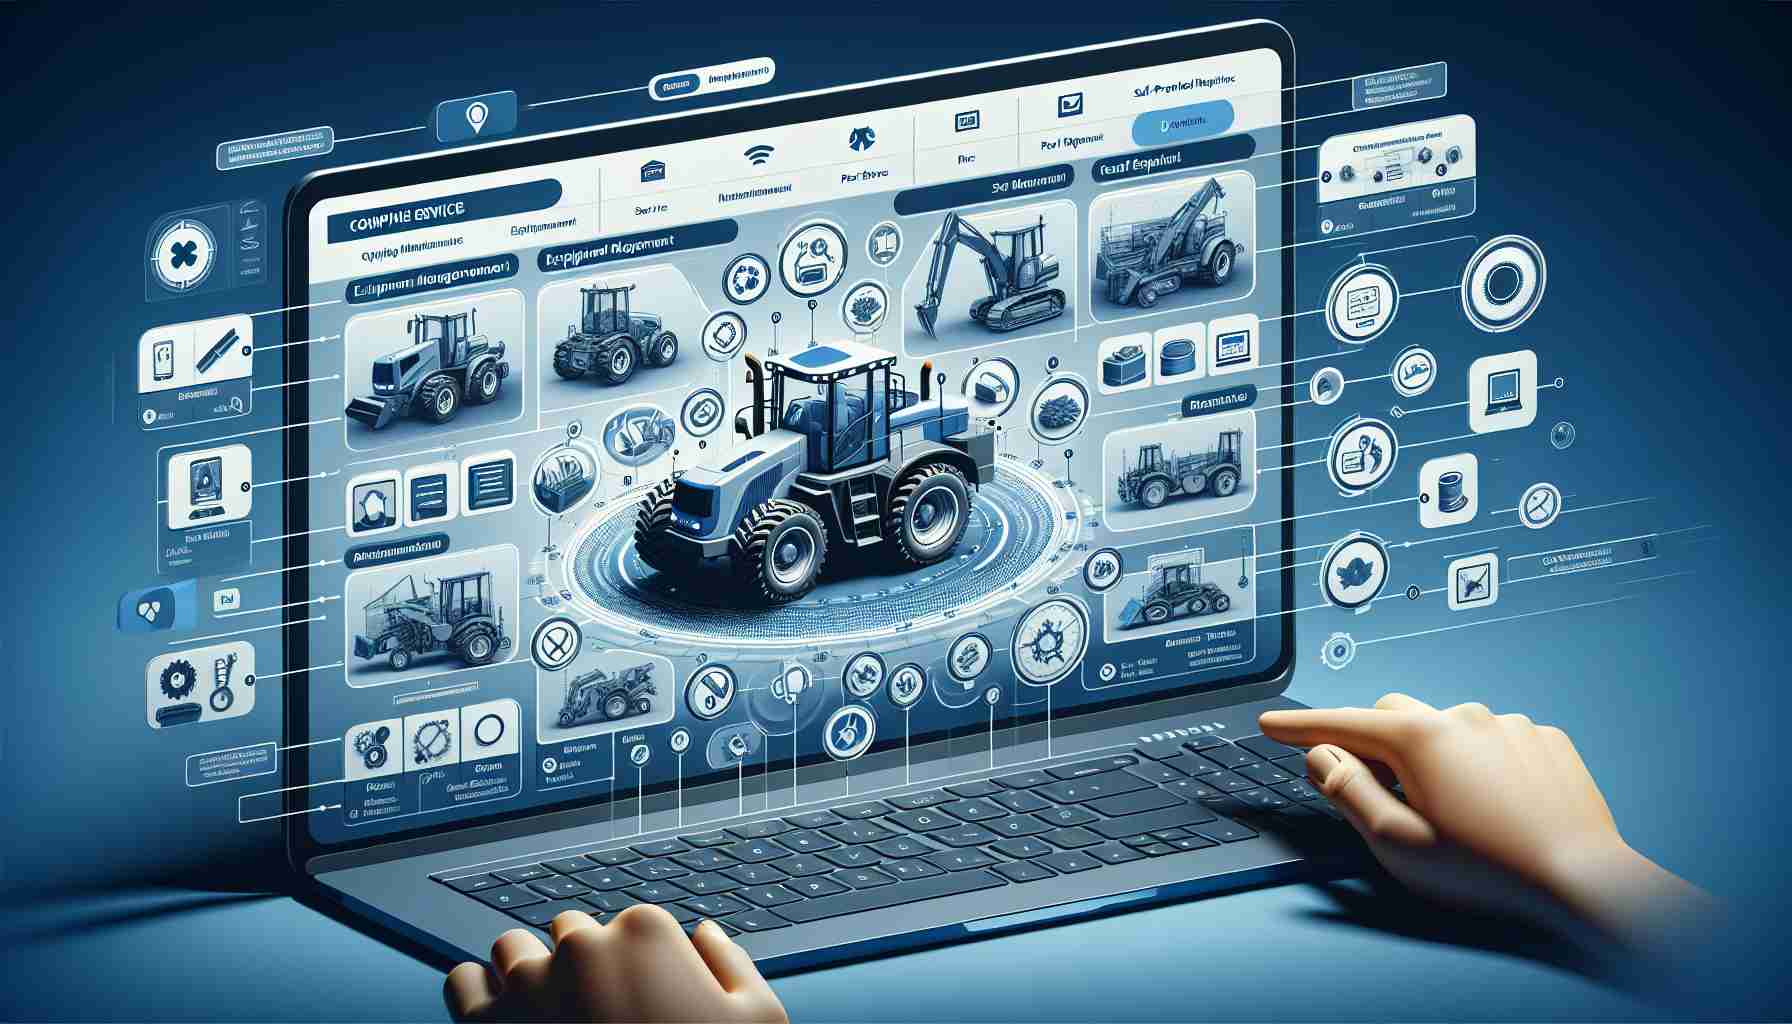 Comprehensive Online Portal Streamlines Services for Self-Propelled Machinery Owners